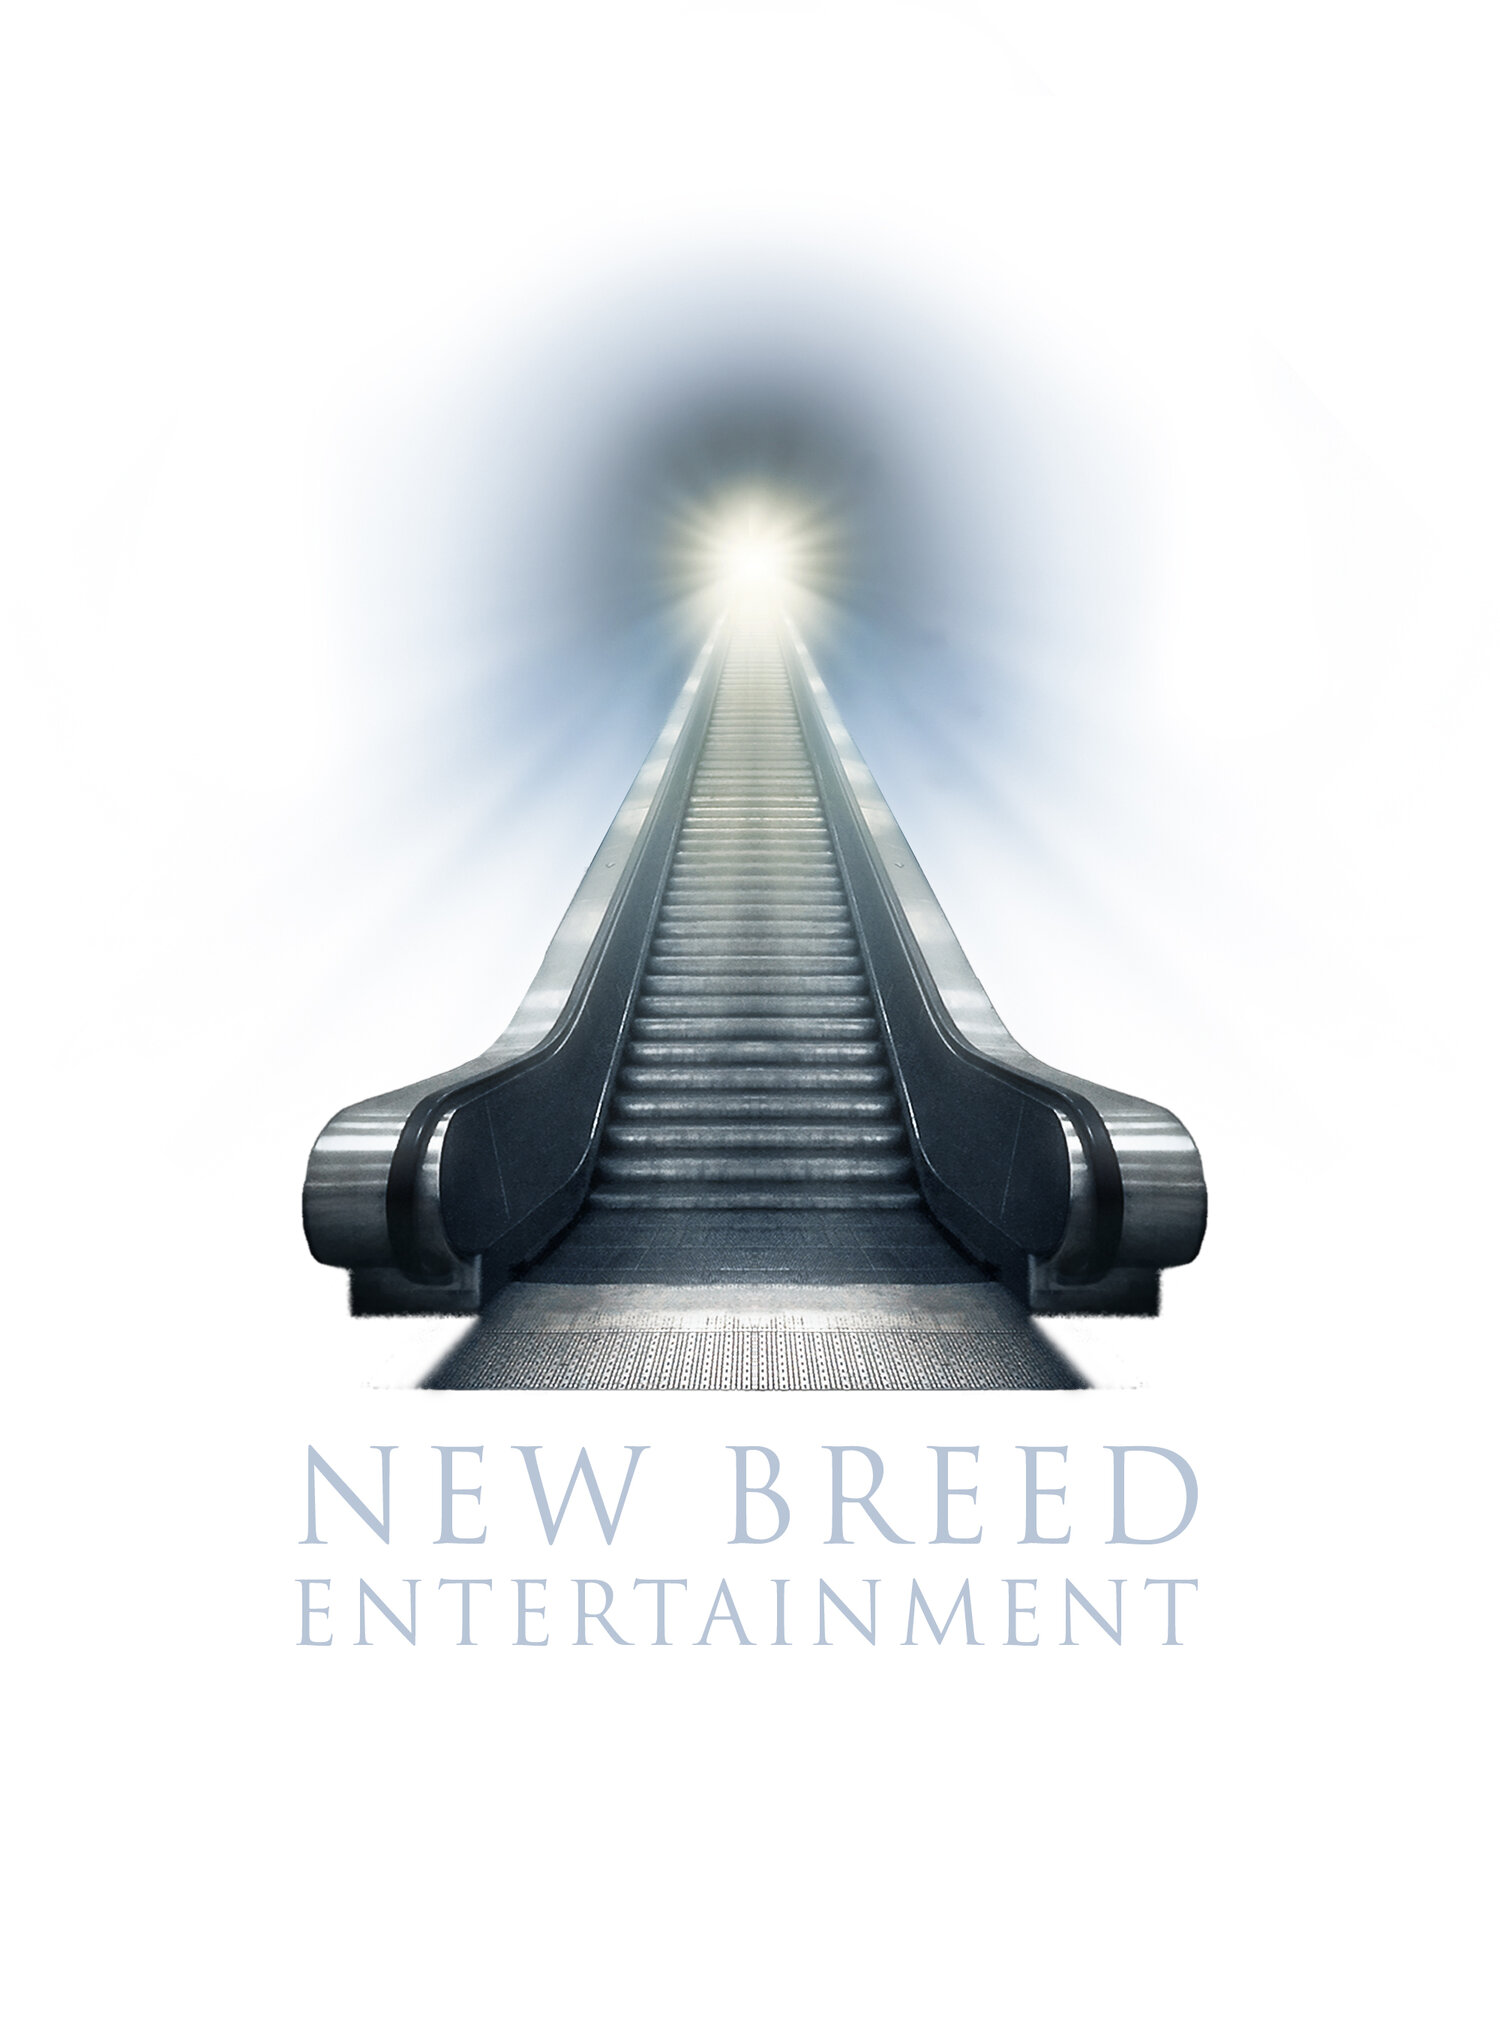 NEW BREED ENTERTAINMENT